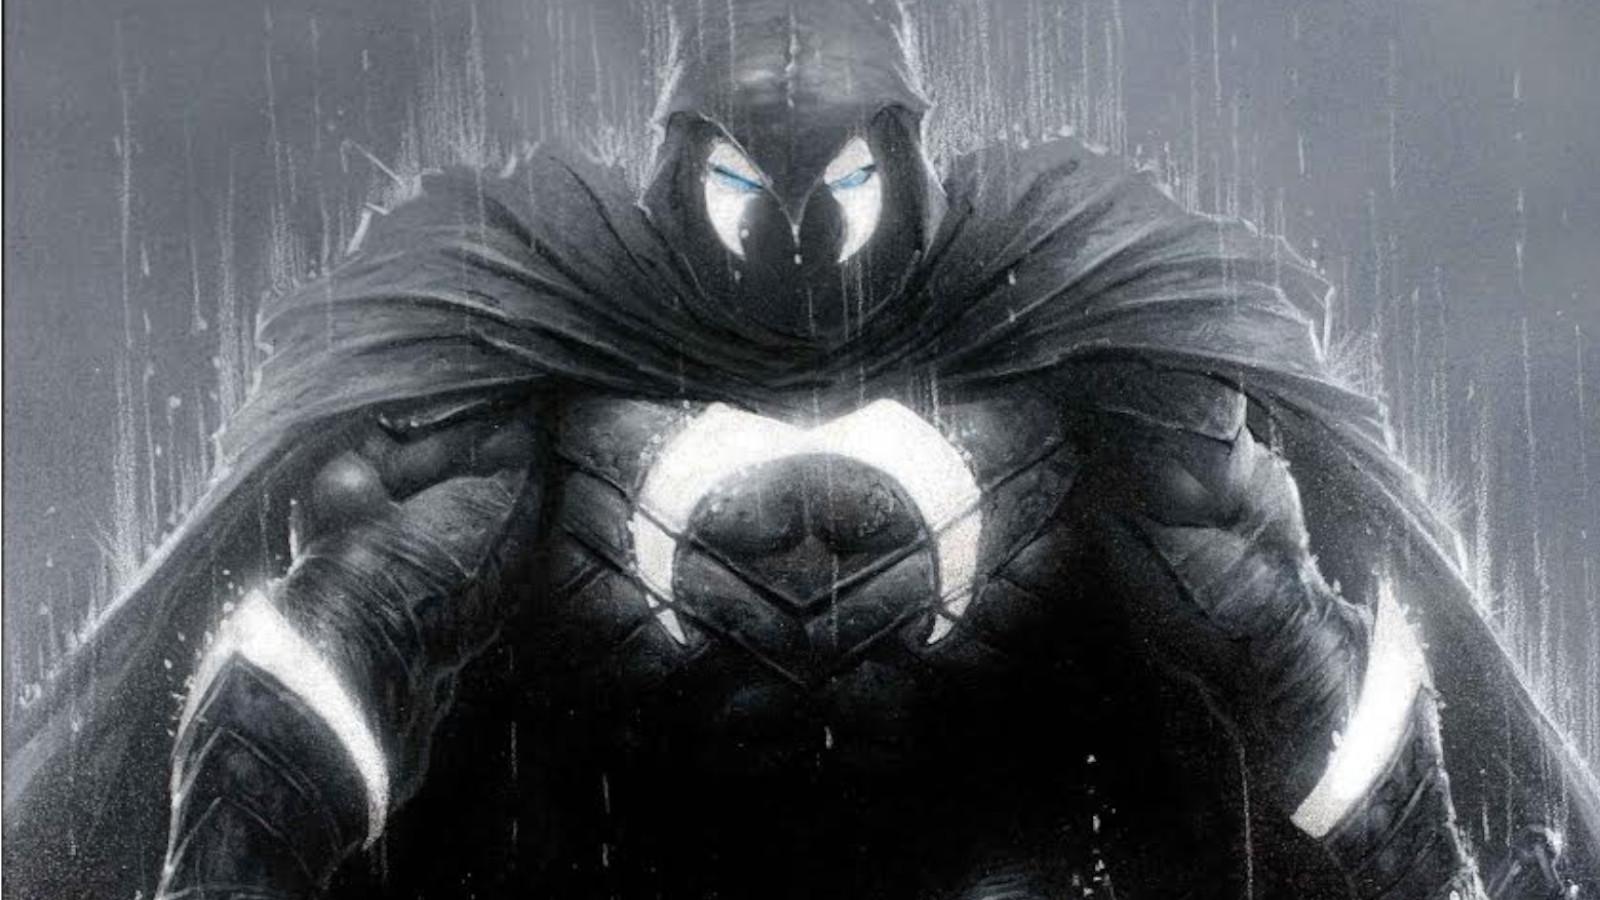 Vengeance of the Moon Knight #1 cover art